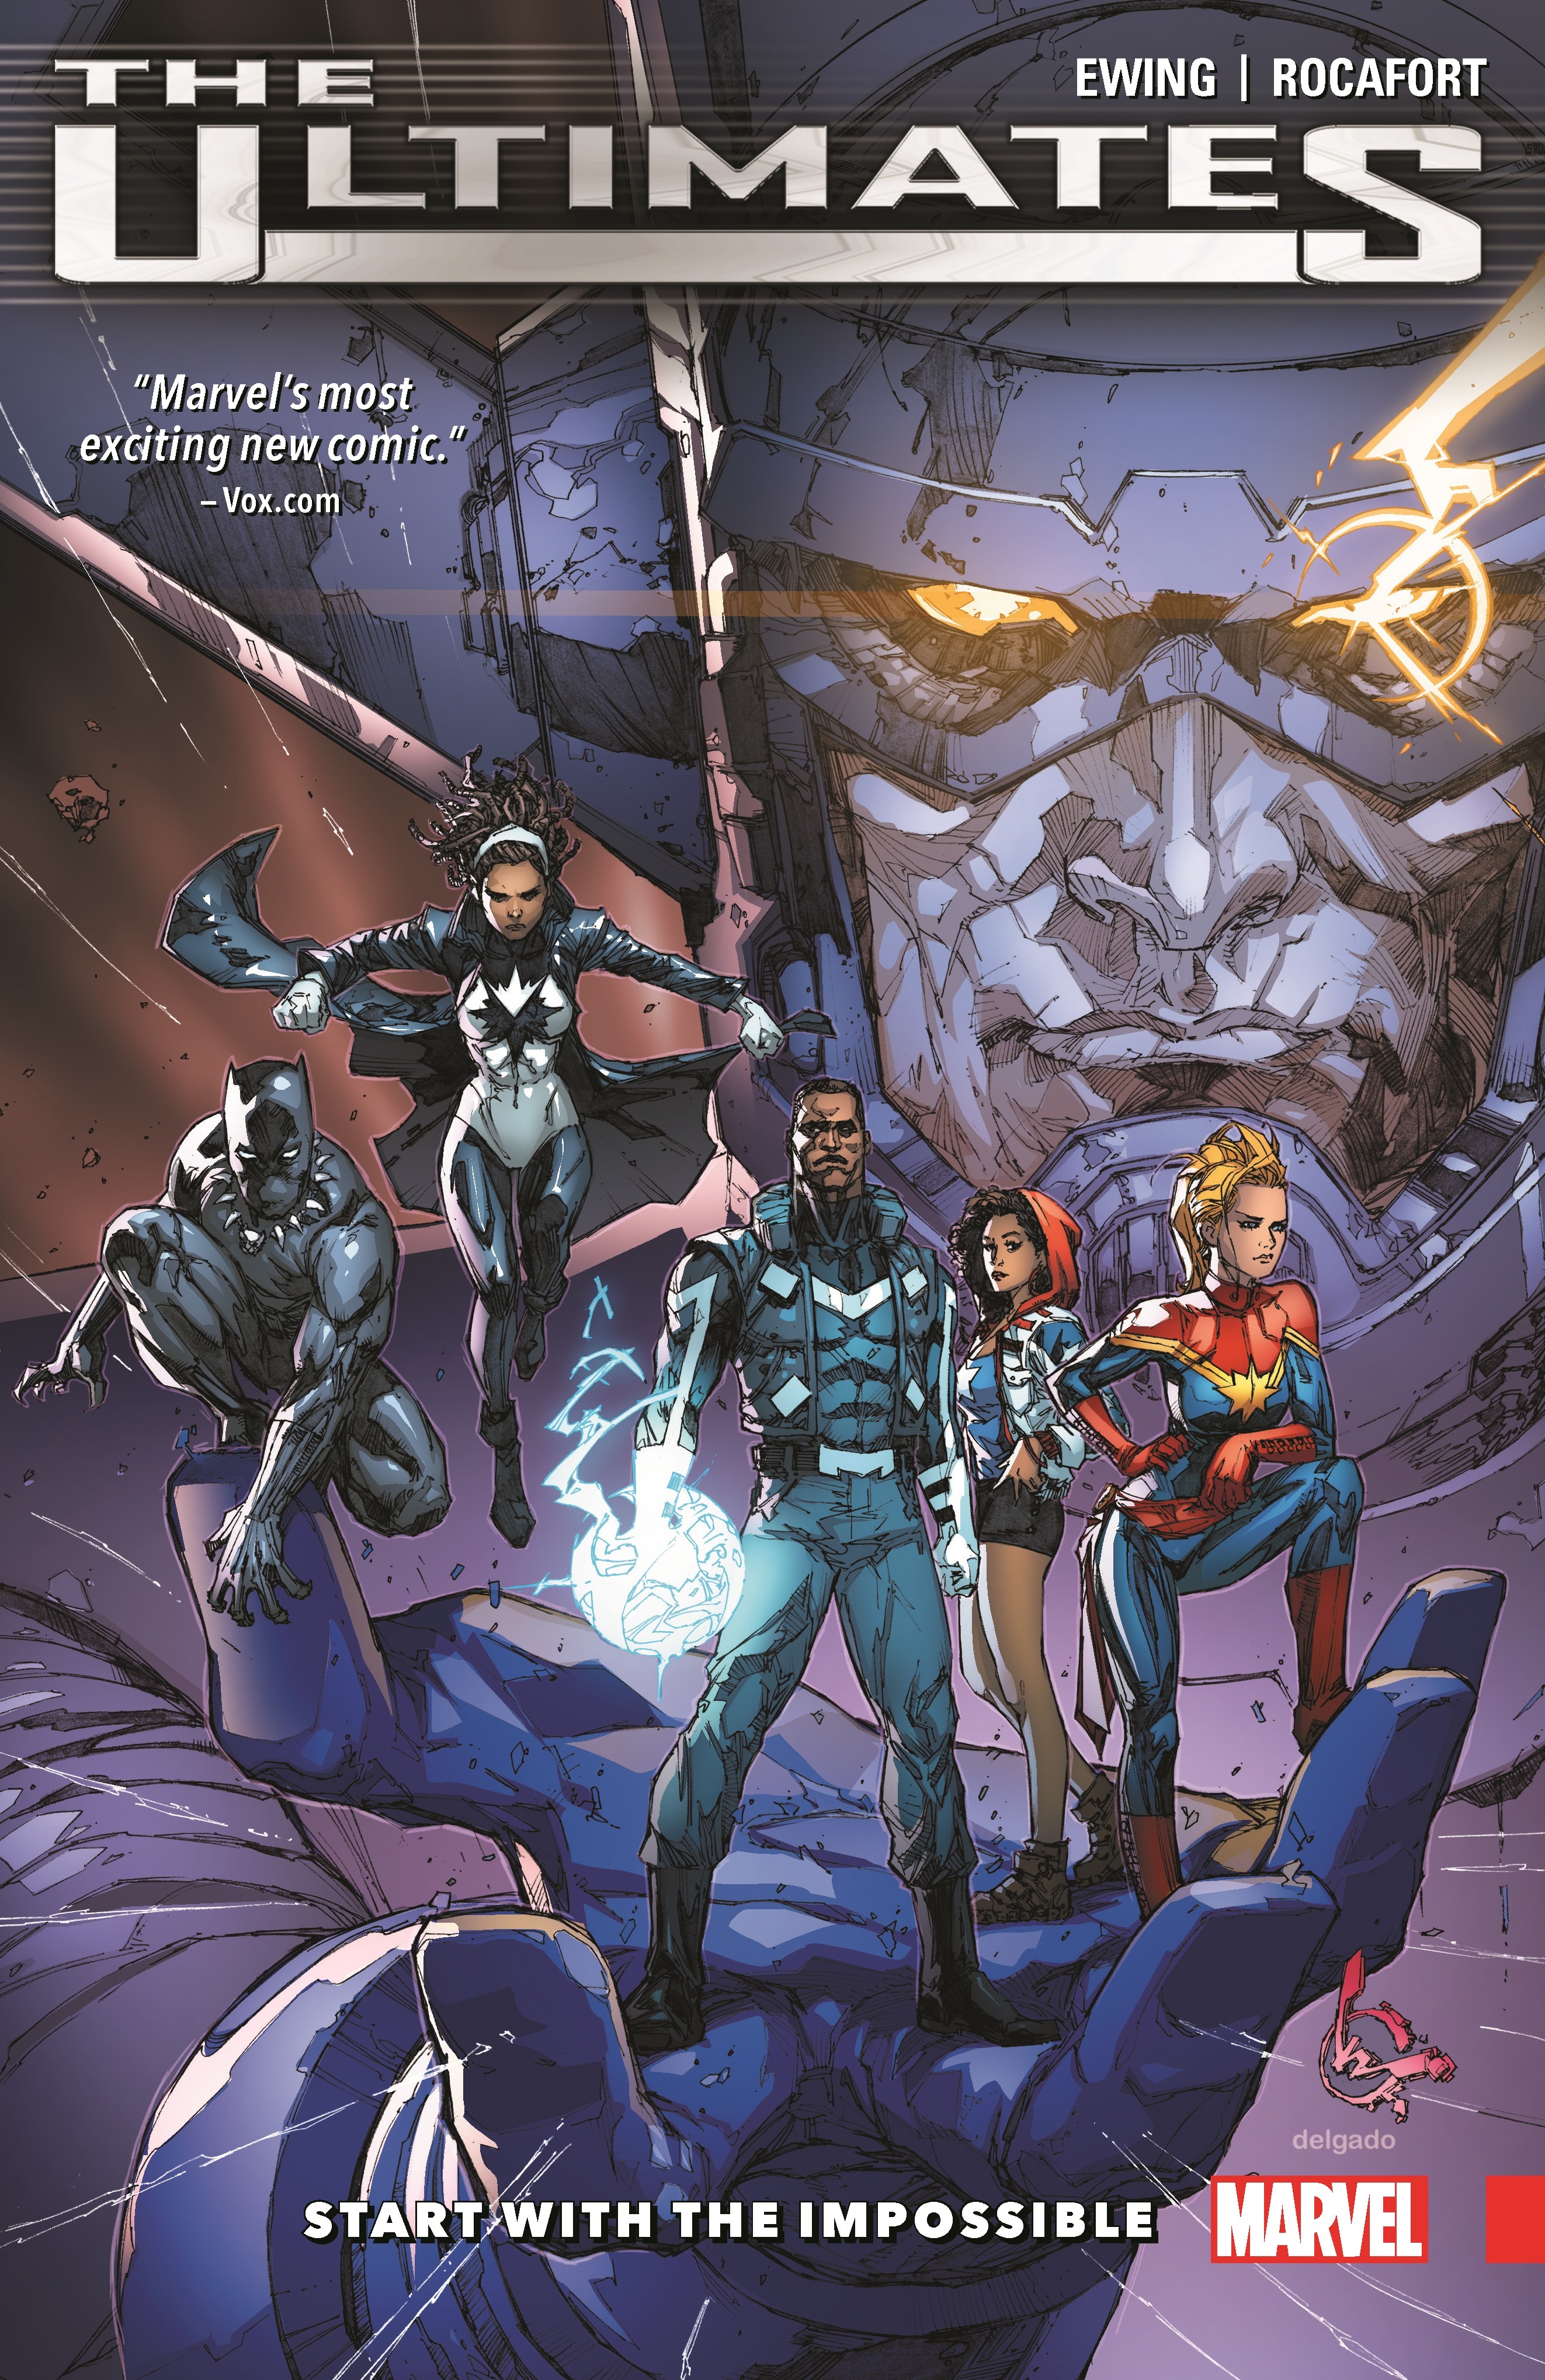 Ultimates: Omniversal Vol. 1 - Start with The Impossible (Trade Paperback), Comic Issues, Comic Books